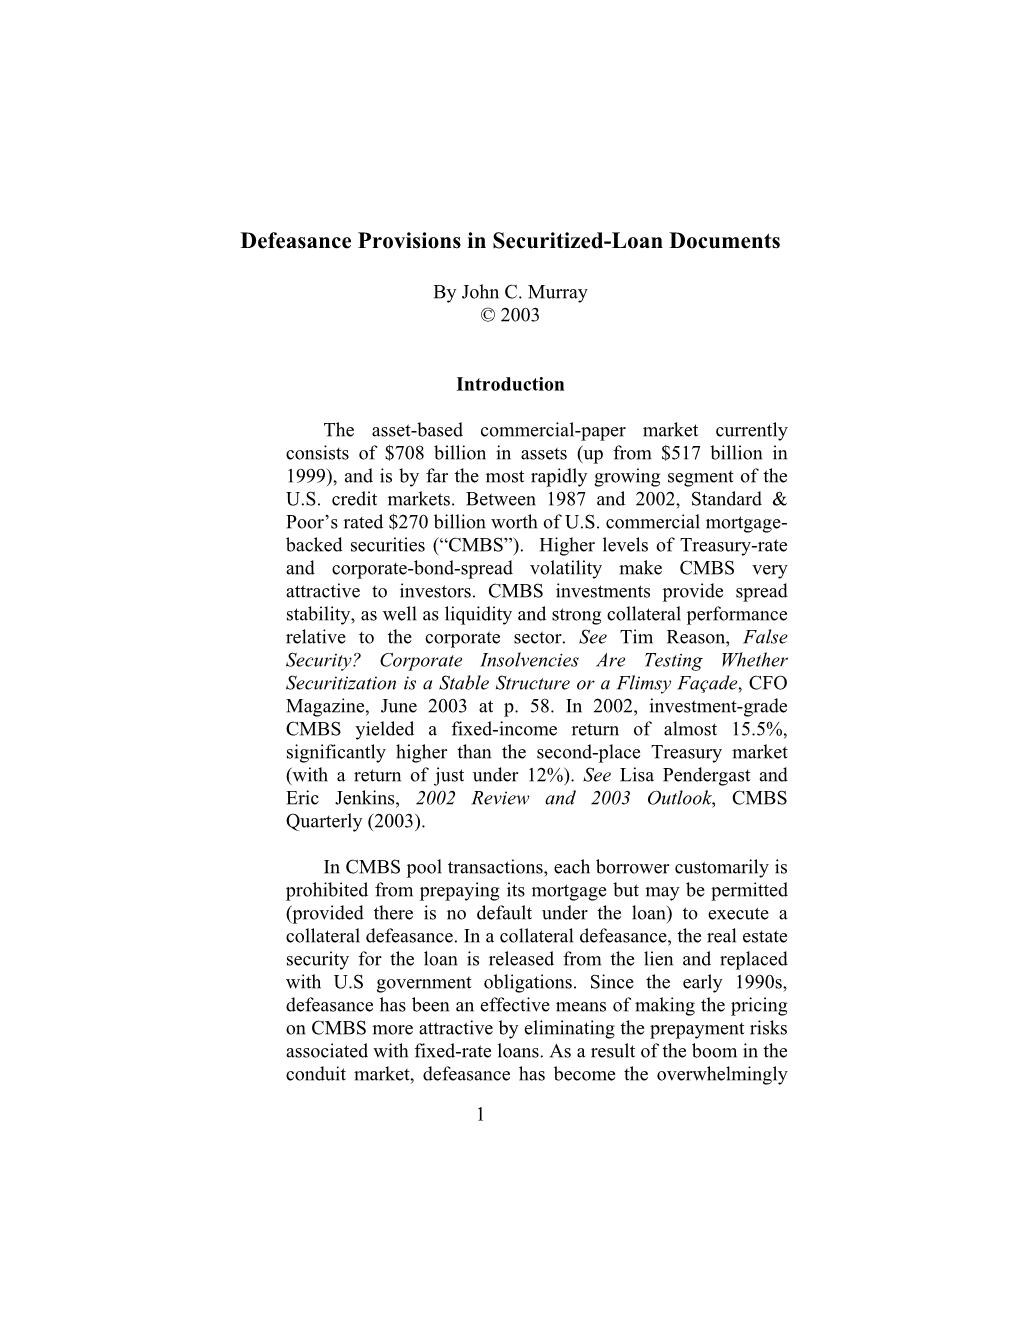 Defeasance Provisions in Securitized-Loan Documents